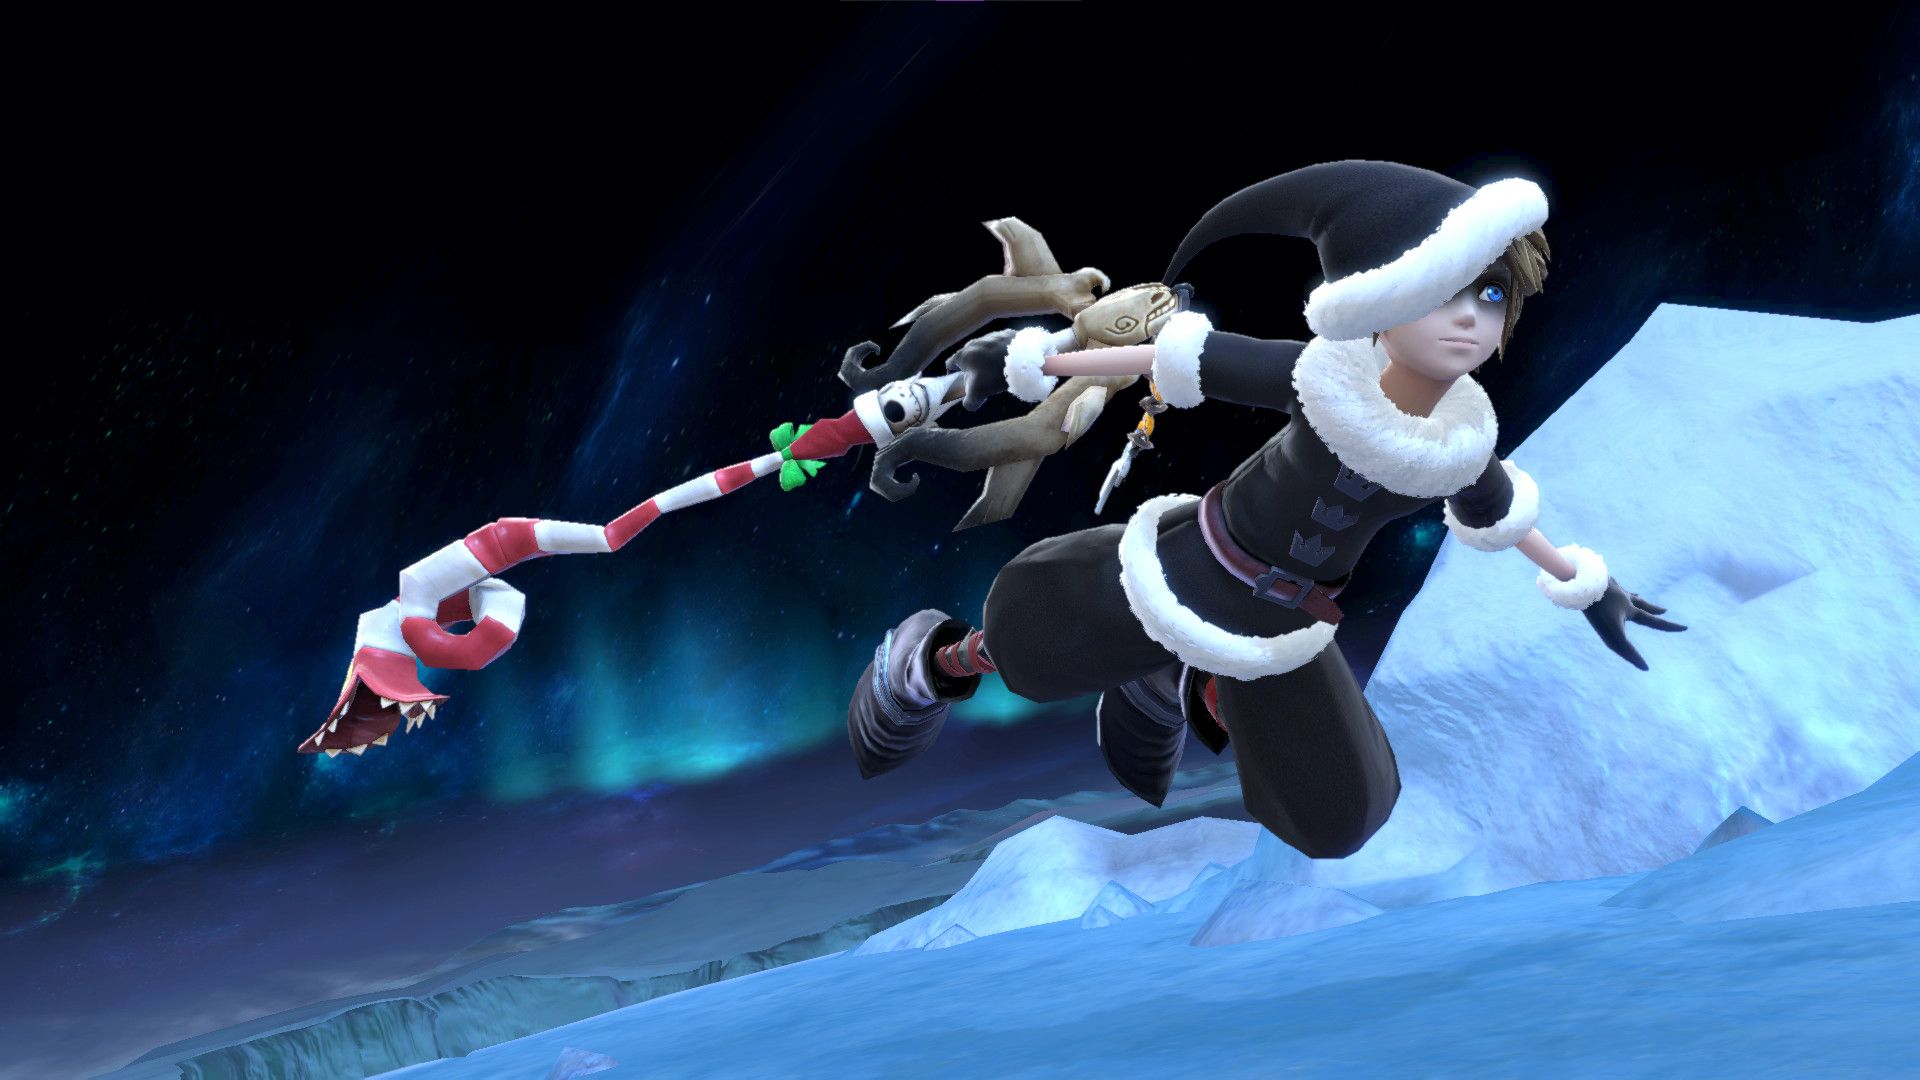 Kingdom Hearts 2 Sora Christmas Town Outfit Modded Into Super Smash Bros Ultimate